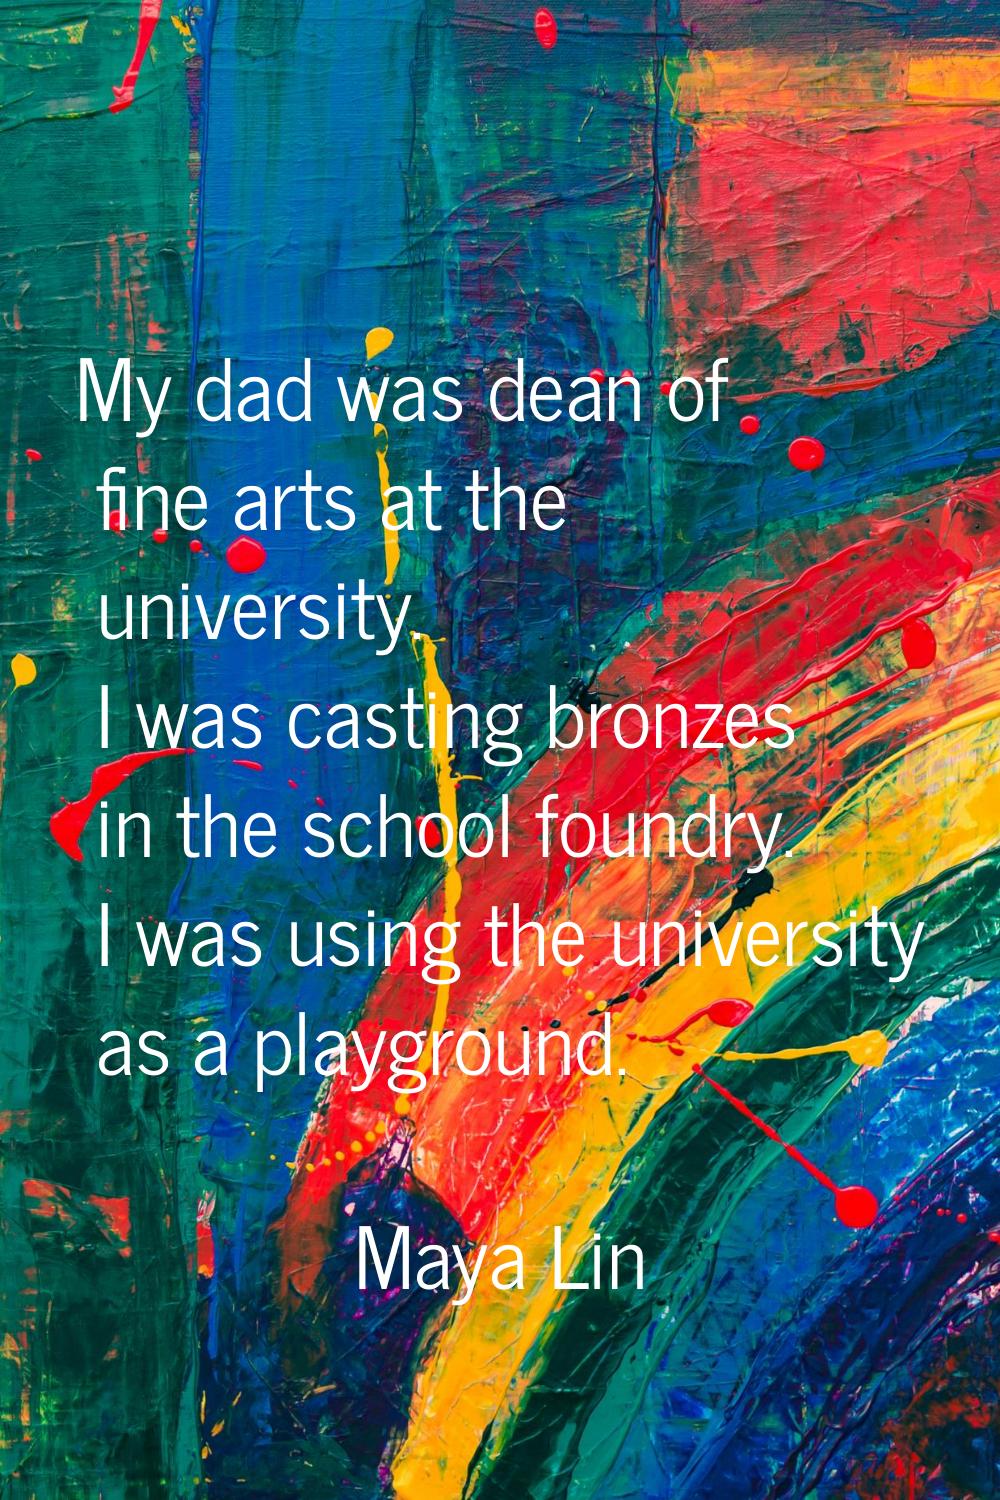 My dad was dean of fine arts at the university. I was casting bronzes in the school foundry. I was 